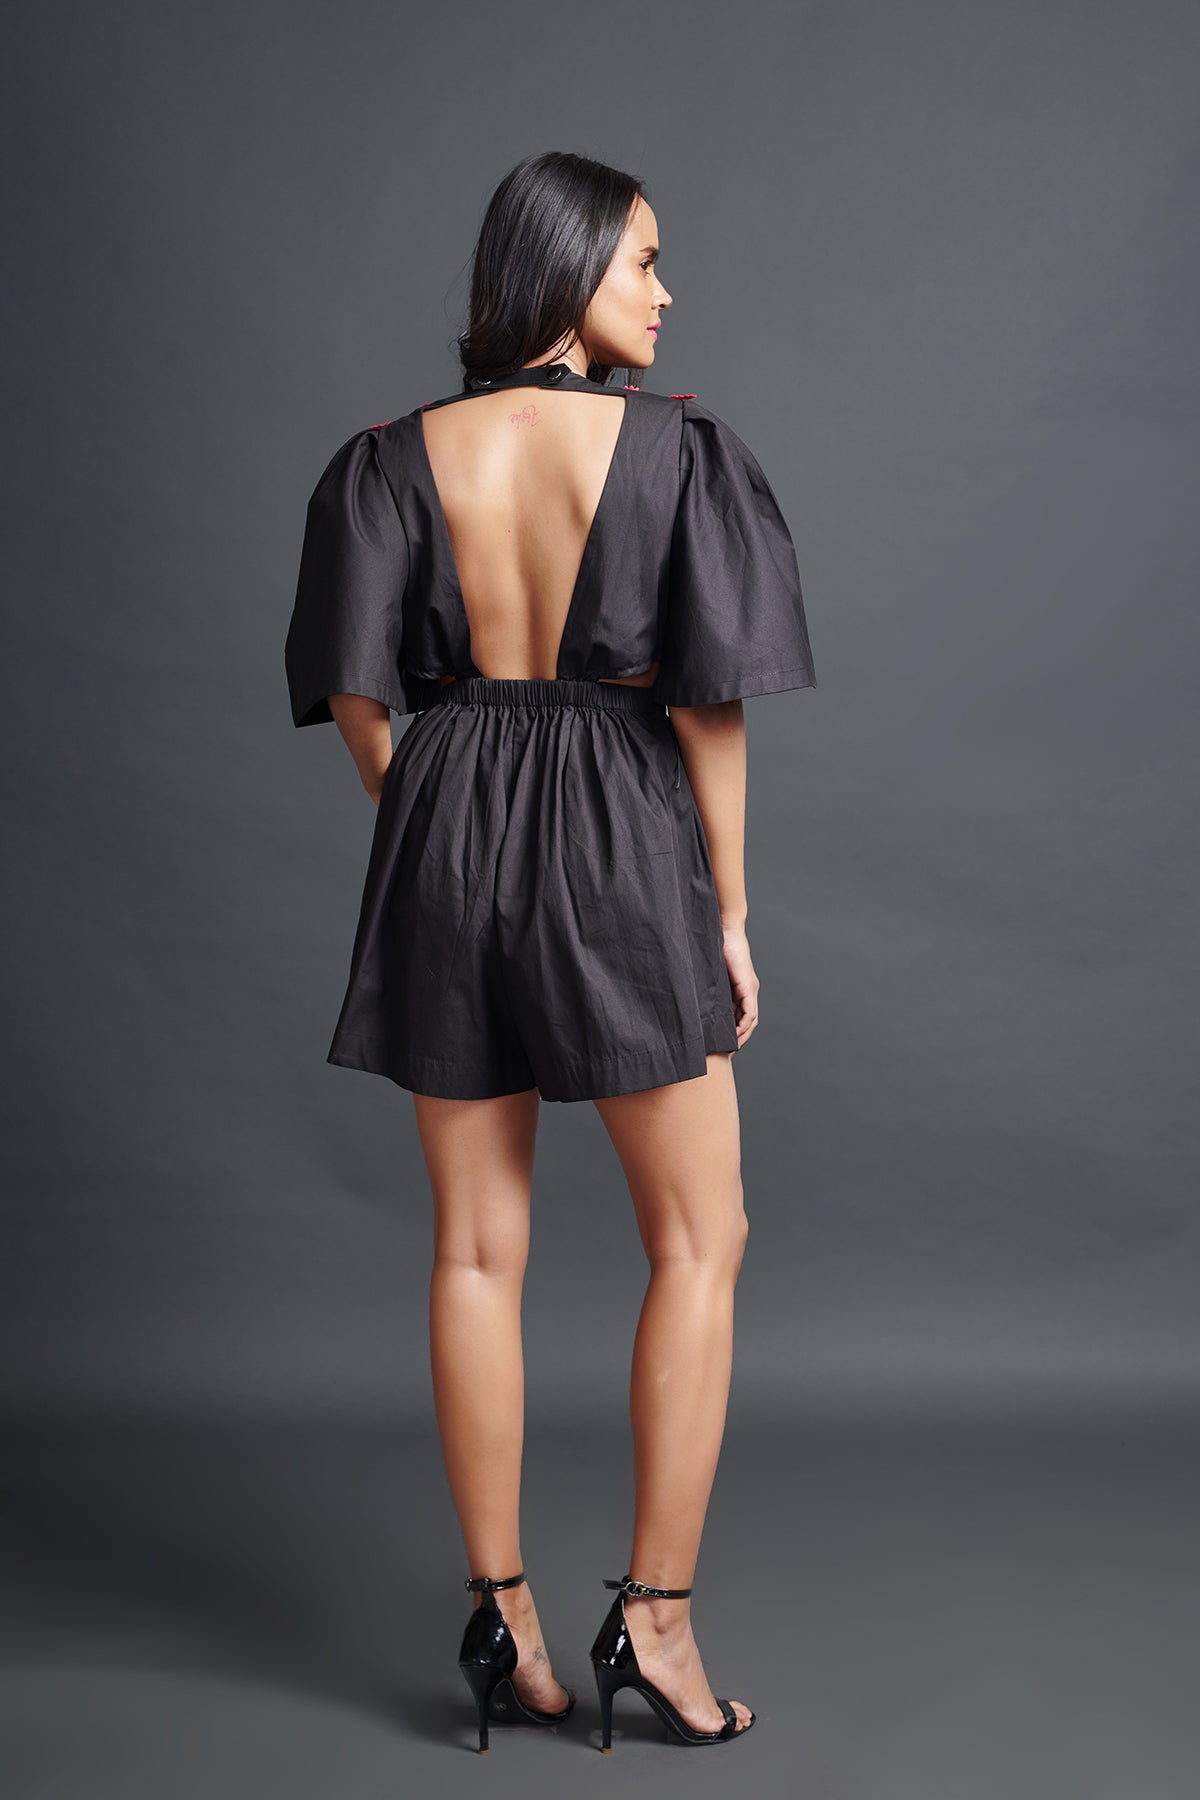 Image of BLACK PLAYSUIT IN COTTON BASE WITH CUTWORK EMBROIDERY AND BACKLESS SIDE CUT-OUT DETAIL. From savoirfashions.com